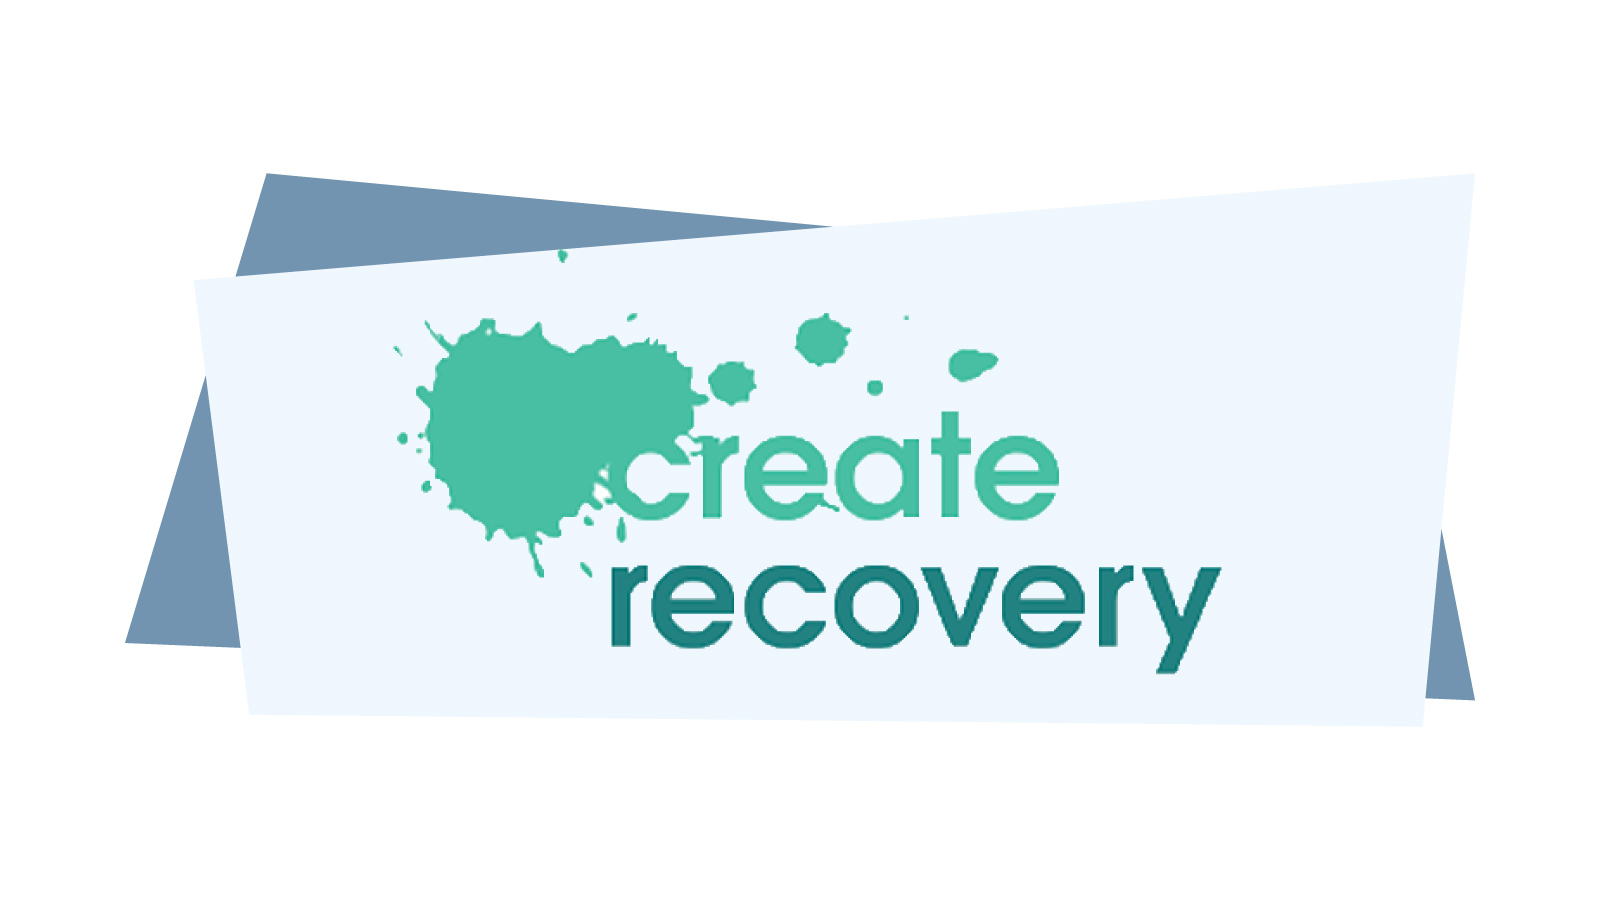 Create recovery